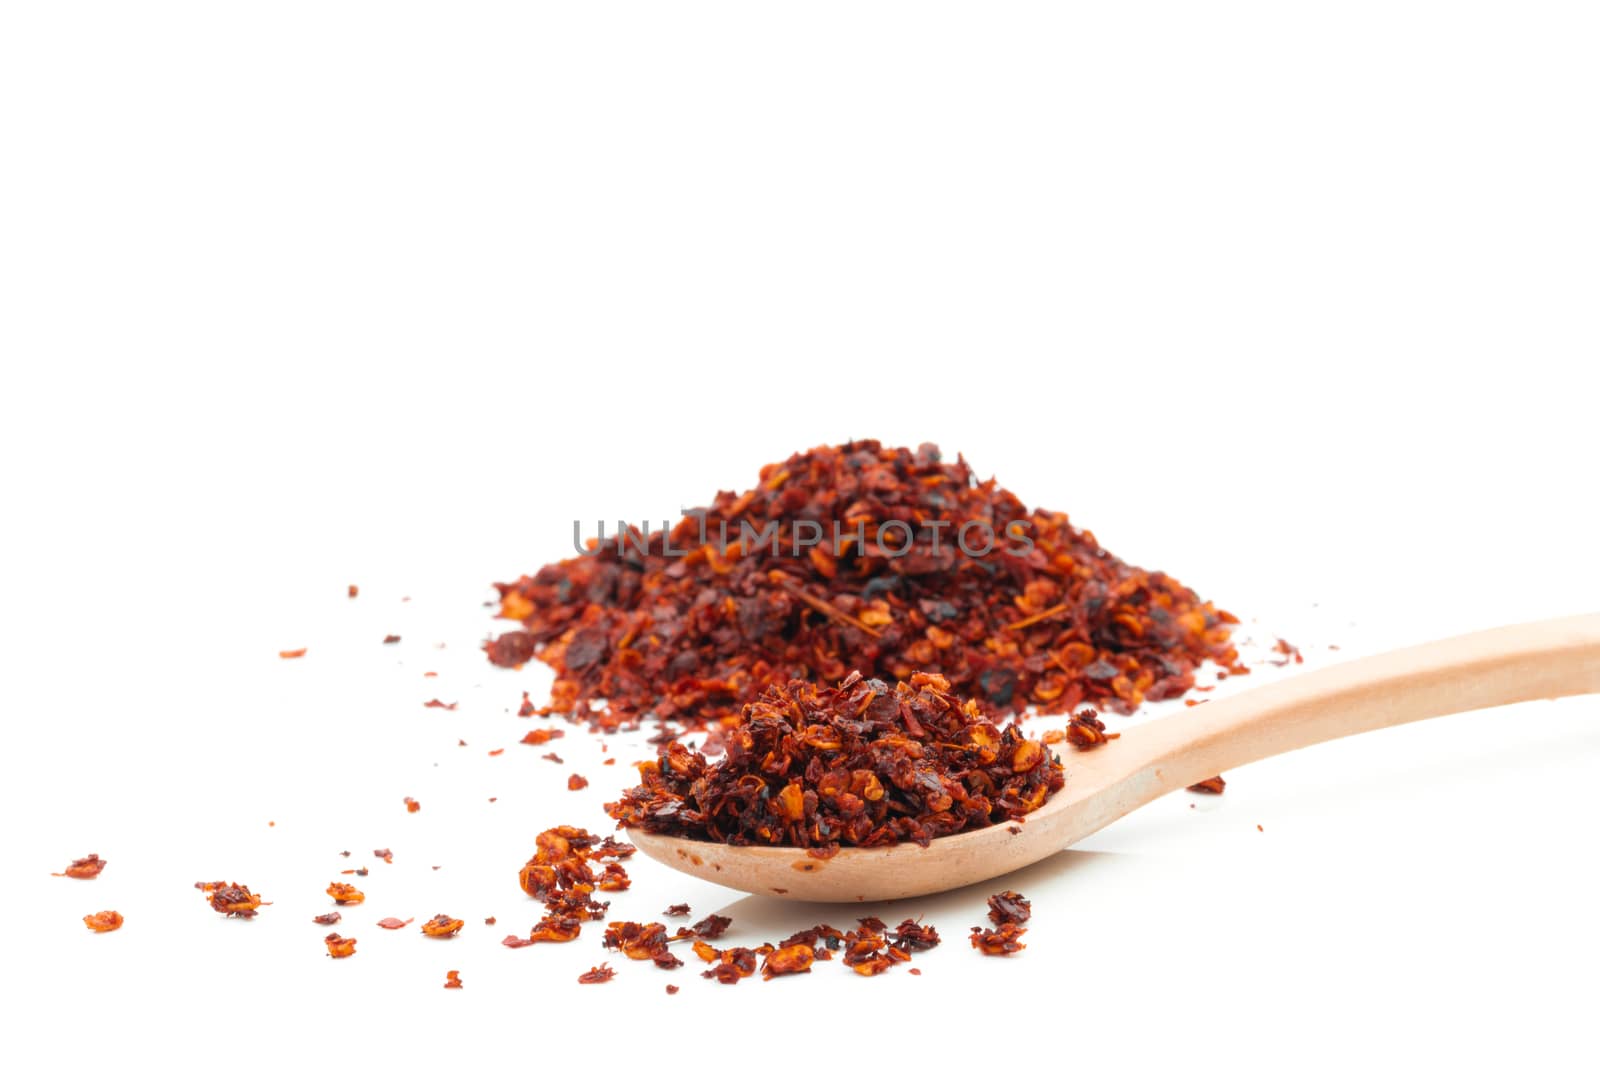 Dried chili meal on a white background